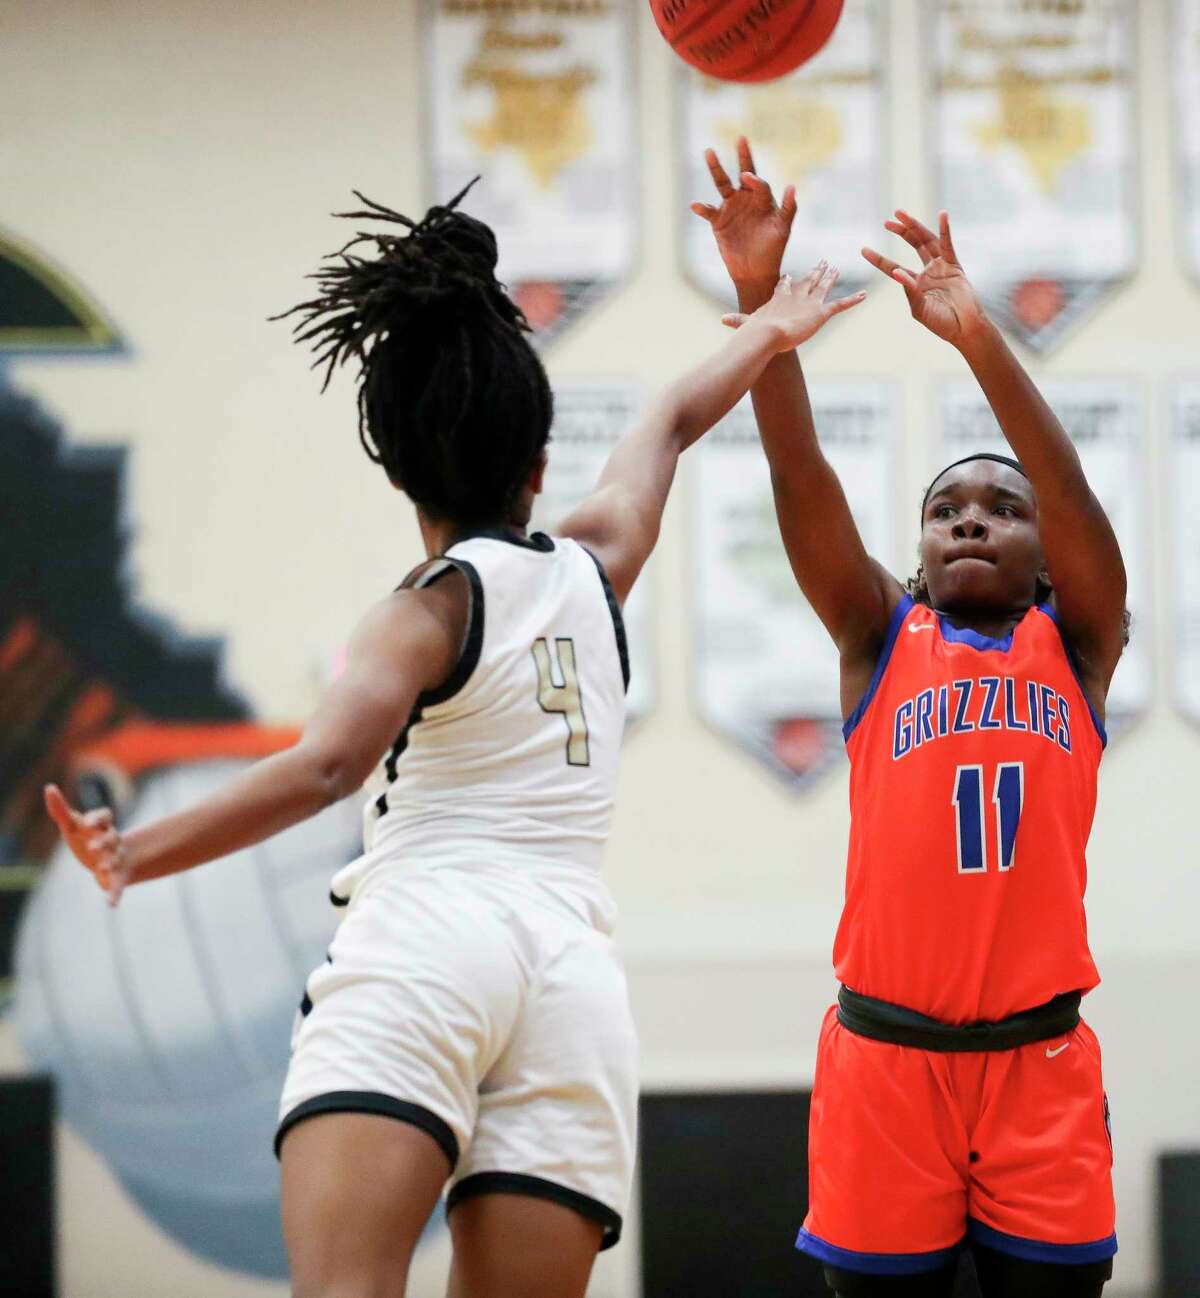 Grand Oaks' Bree Riley (11) shoots over Conroe's Alana Harris (4) during the second quarter of a District 13-6A high school basketball game at Conroe High School, Friday, Dec. 30, 2022, in Conroe.